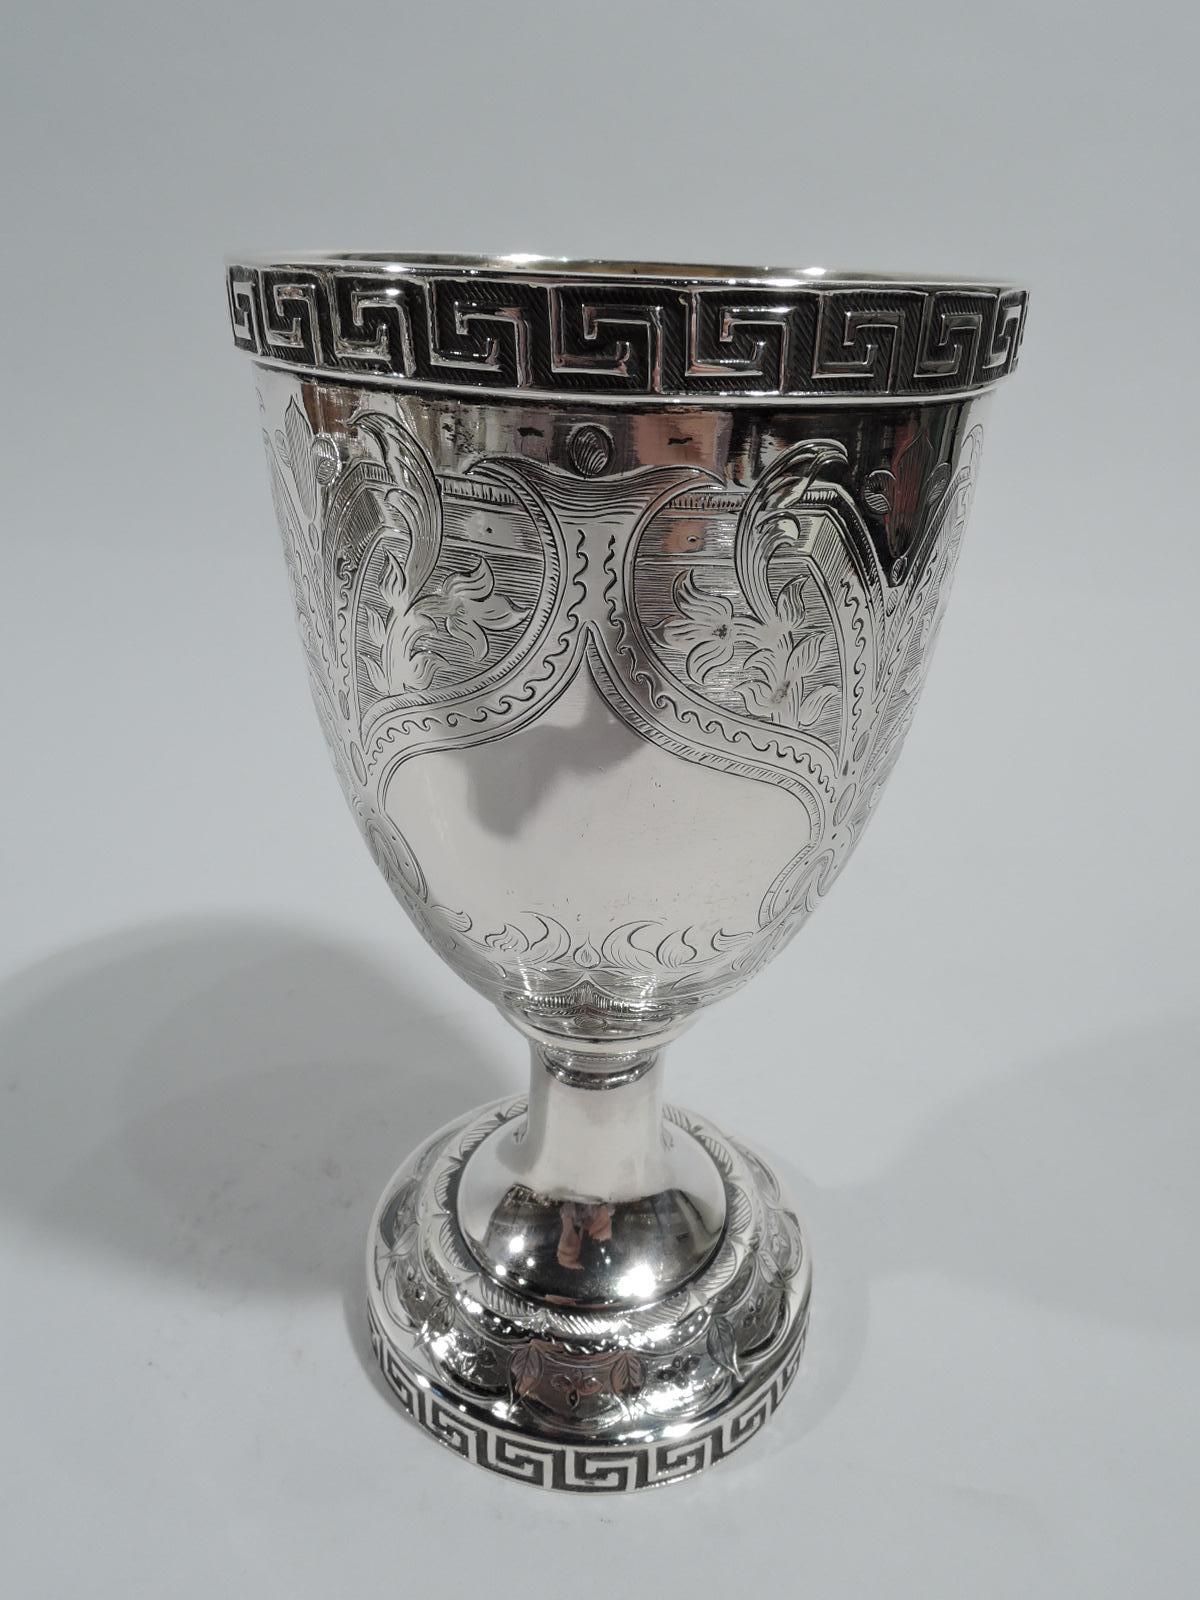 Classical coin silver goblet. Made by William Gale & Son in New York, ca 1860. Oval bowl on columnar stem mounted to domed foot. Engraved leafing scrolls in scrolled strapwork frames on lined ground. One frame vacant. Raised fretwork rims. Bowl